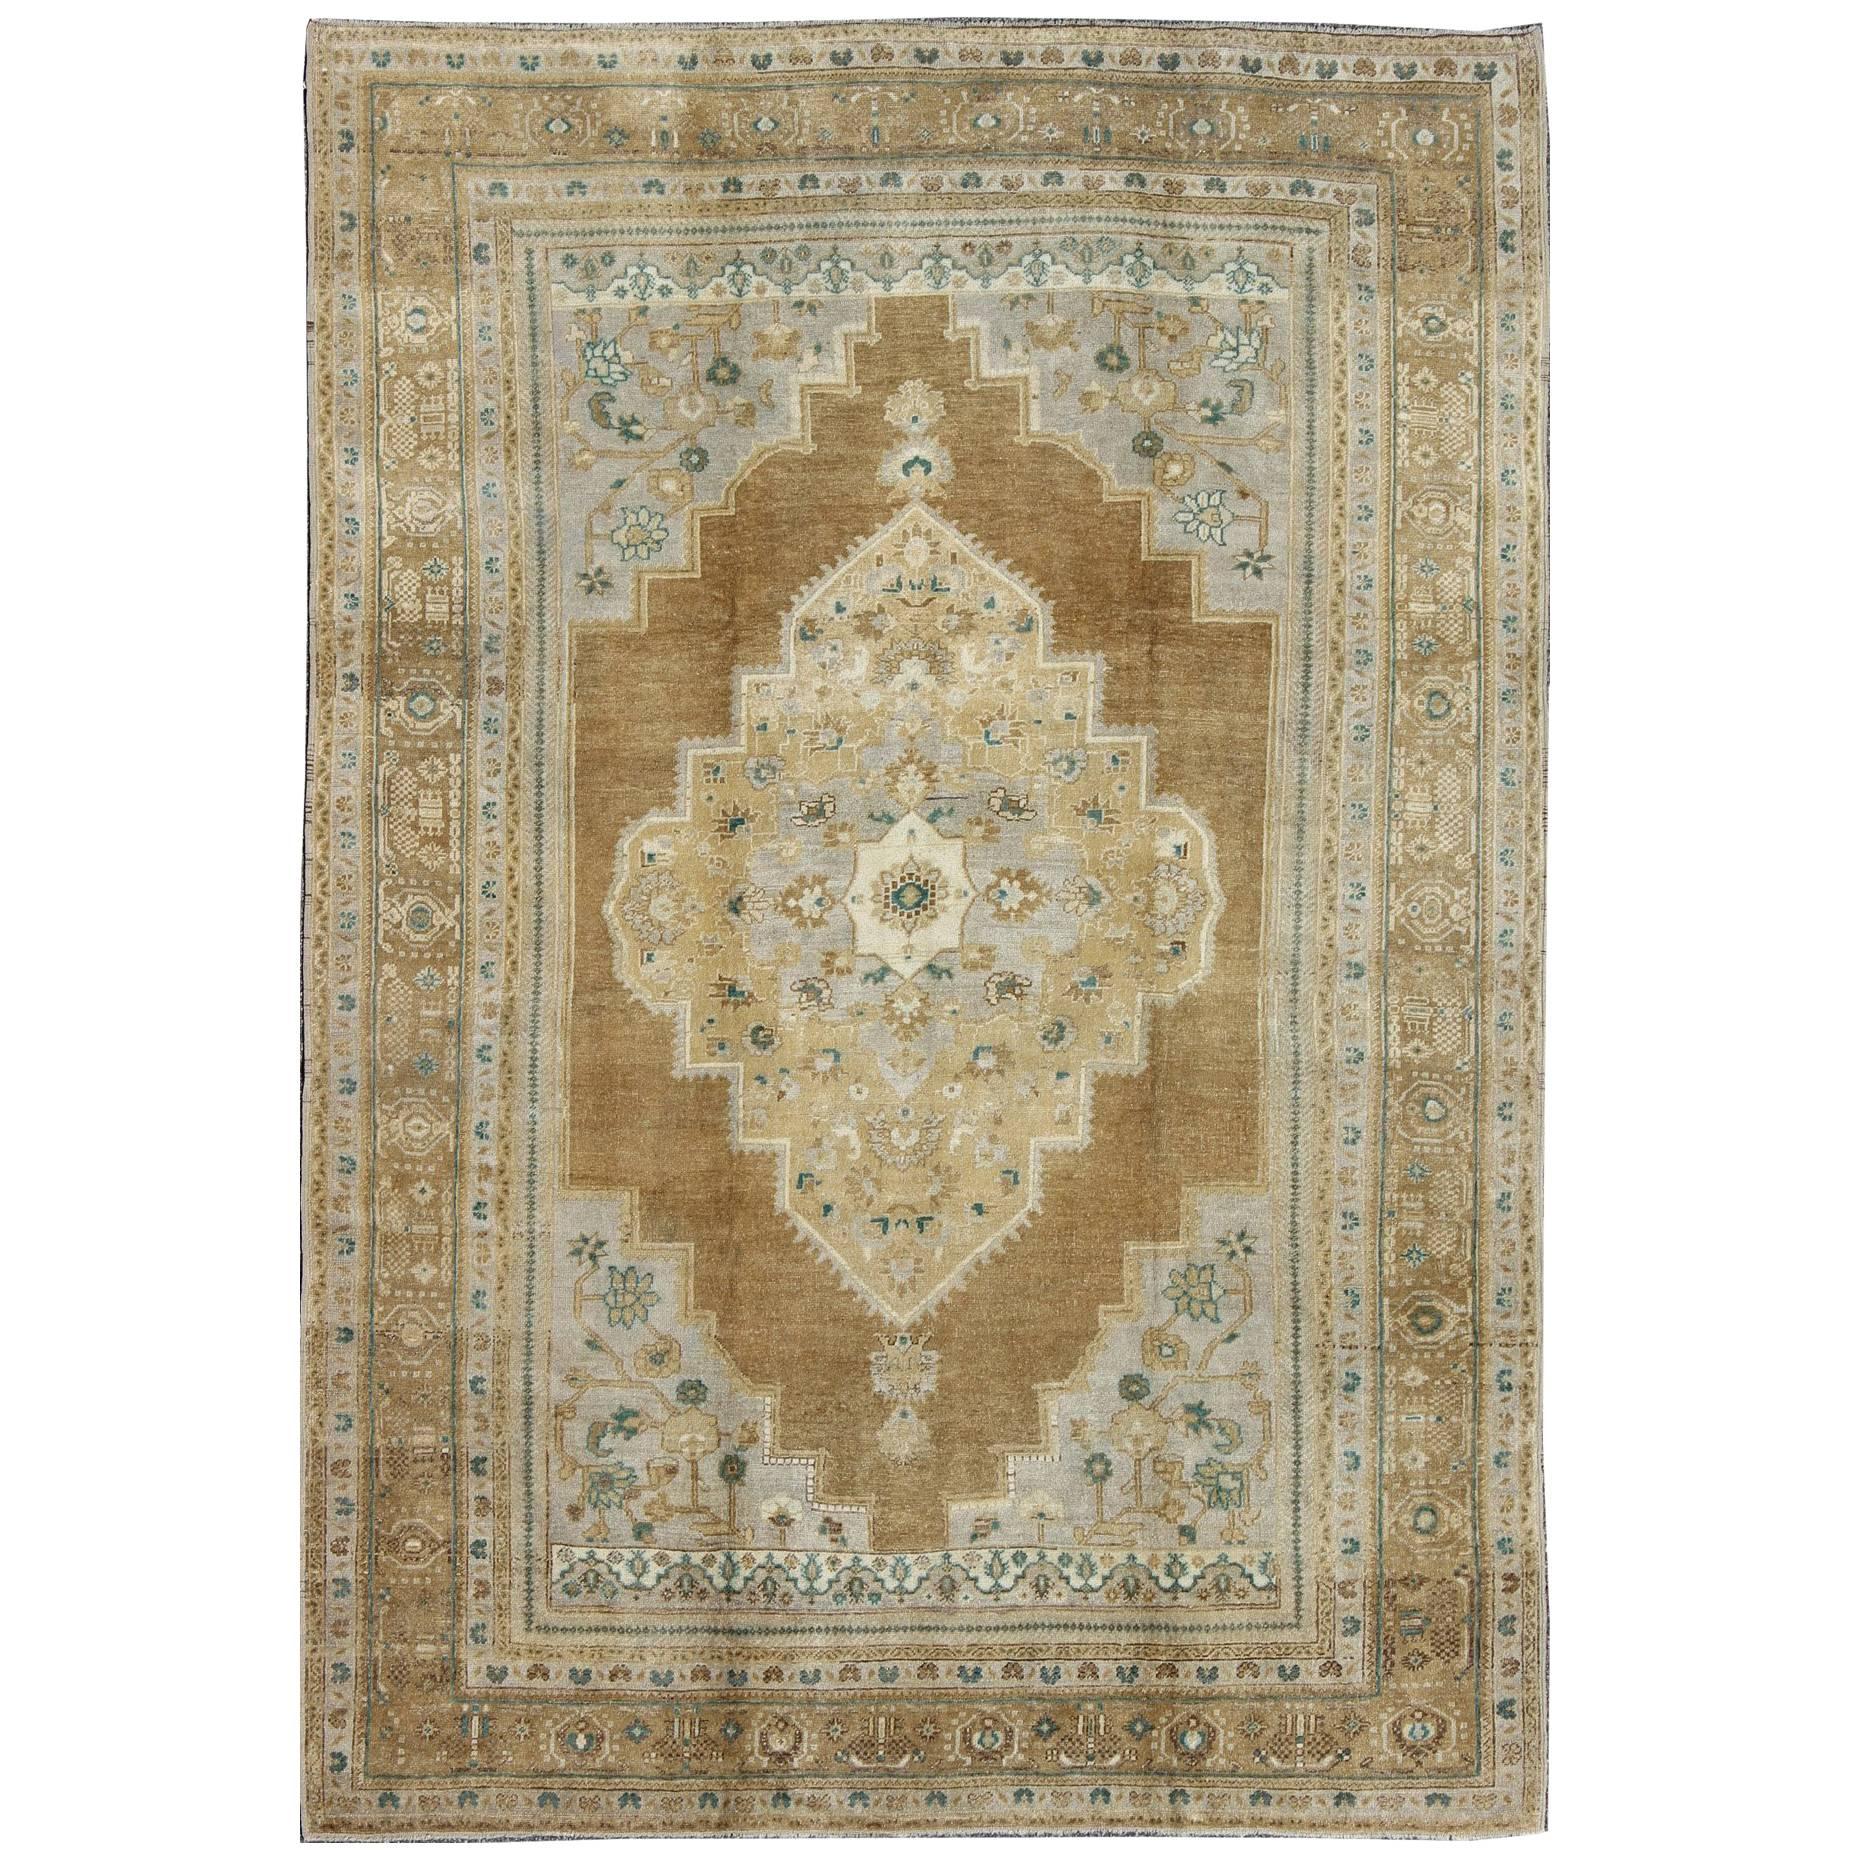 Vintage Oushak Turkish Rug in Light Golden Brown, Gray/Blue and Teal Accents